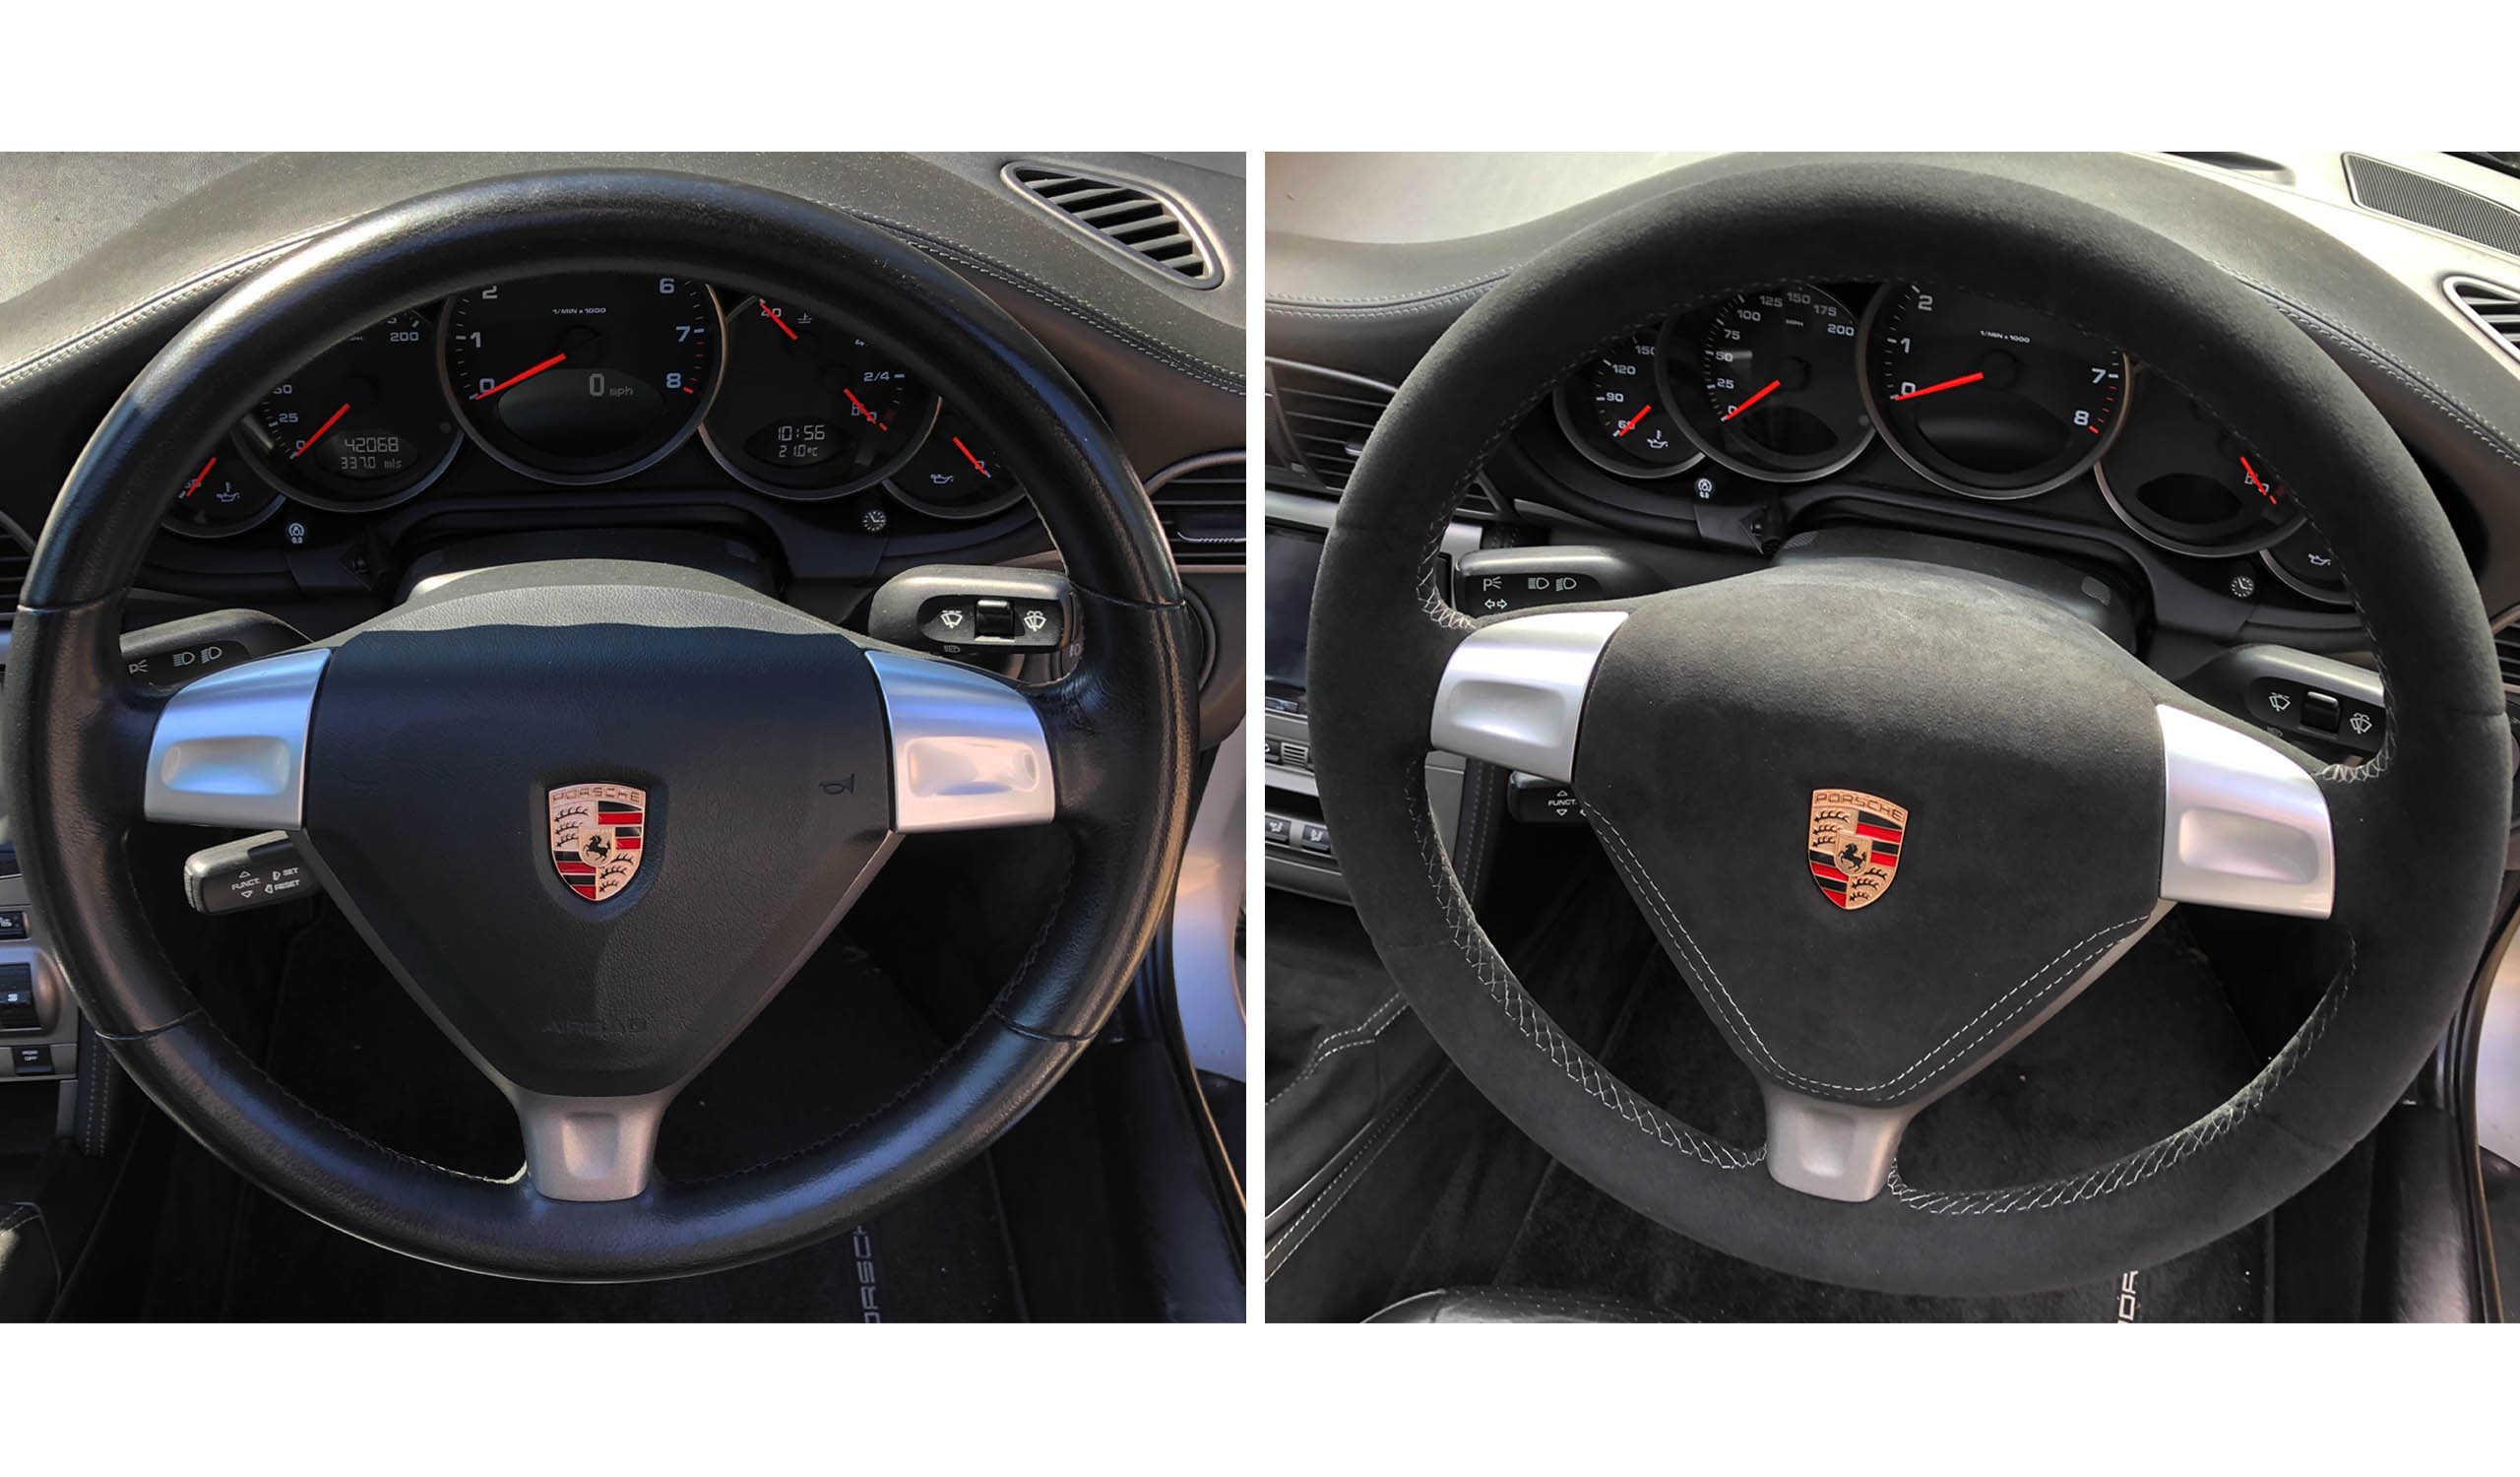 Porsche 911 997 alcantara steering wheel re trim including airbag cover with silver grey stitching